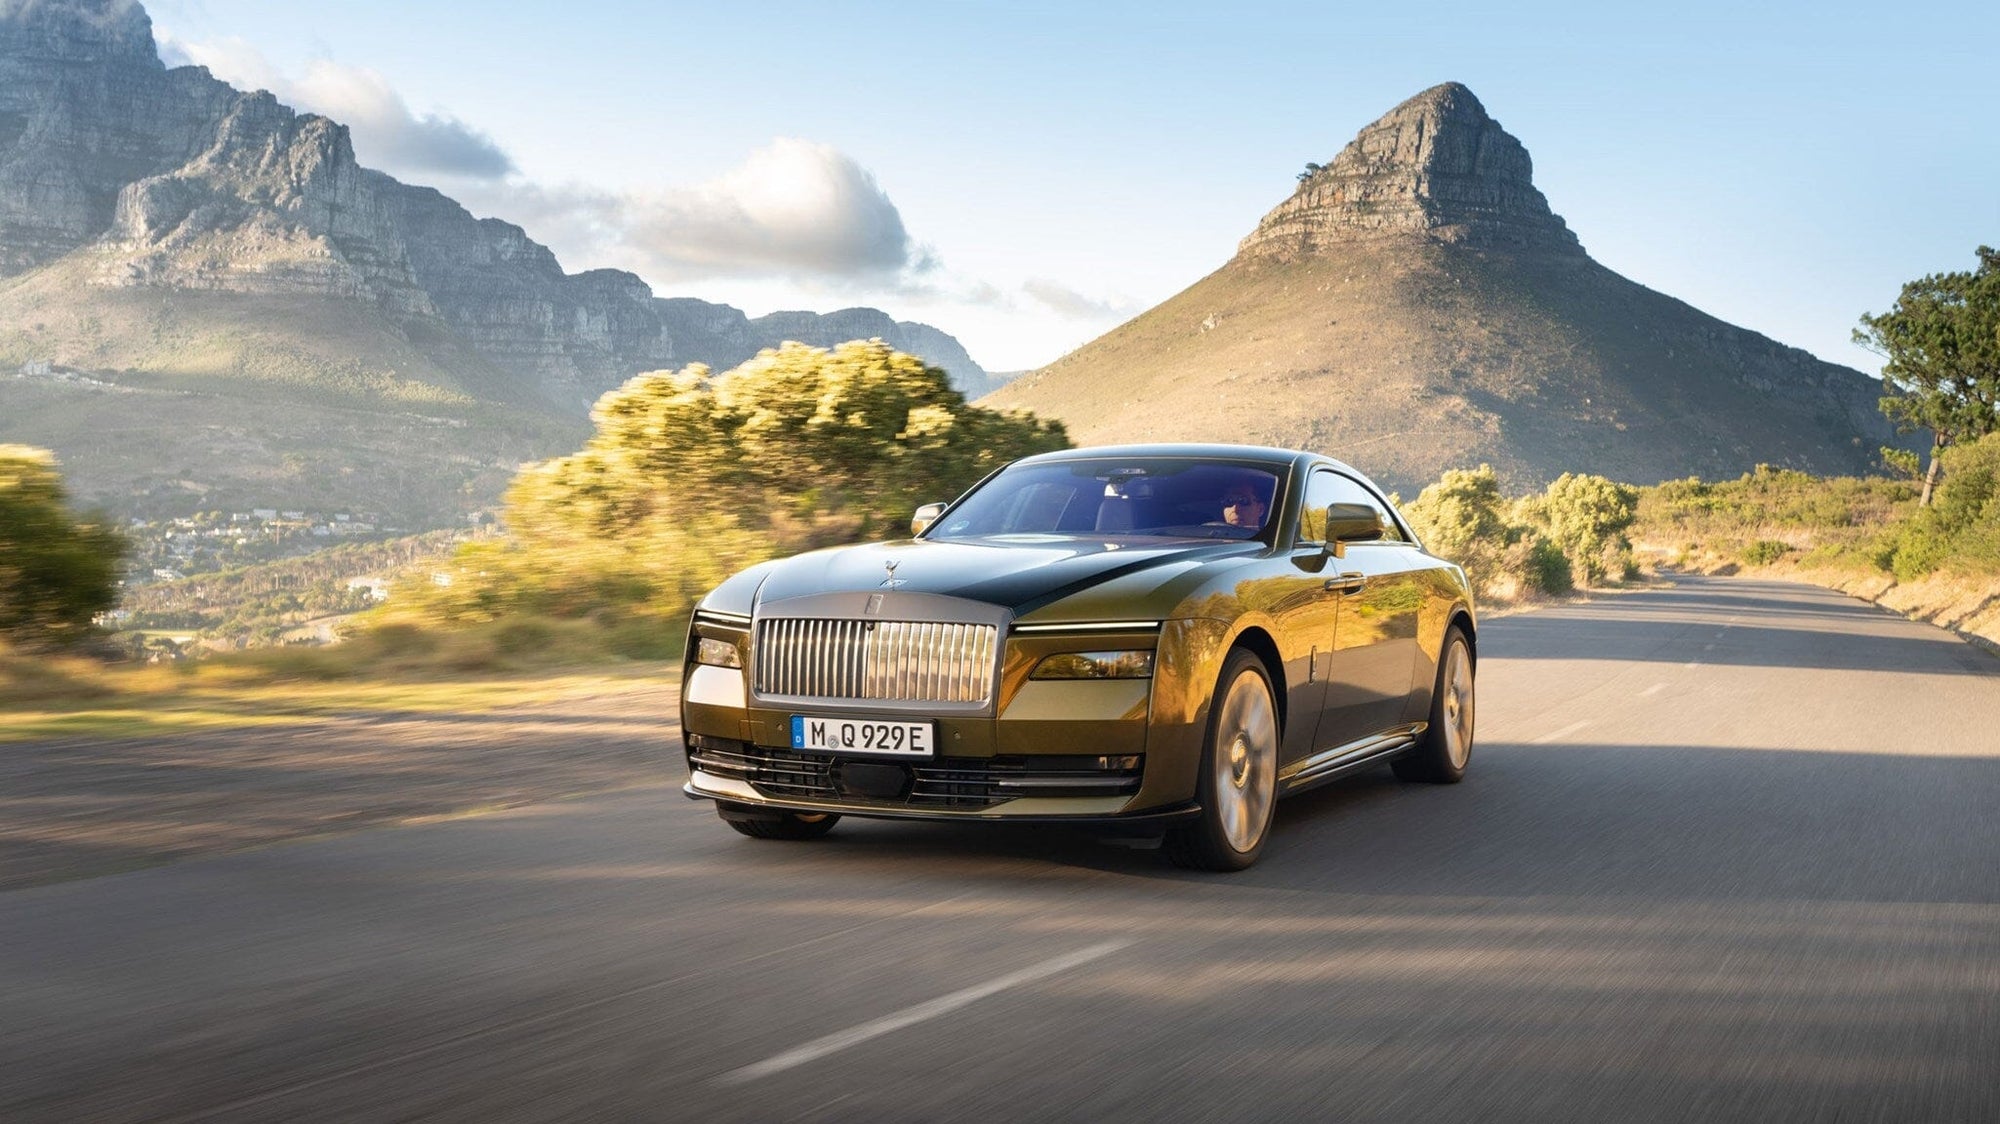 Rolls-Royce: Finally Joining the Electric Party with the All-New Spectre